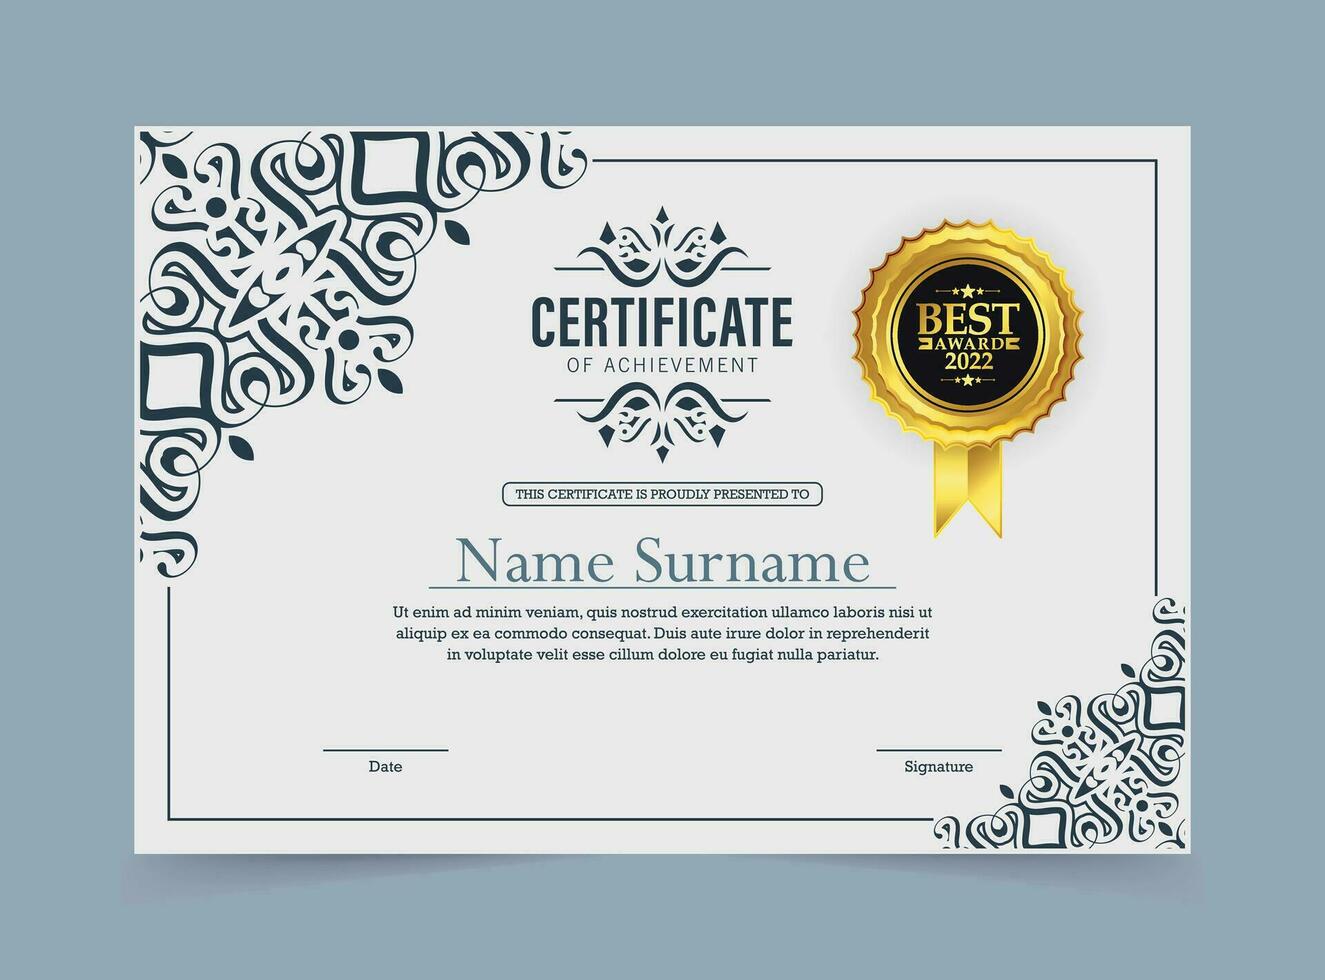 Certificate of achievement template with vintage gold border - Vector